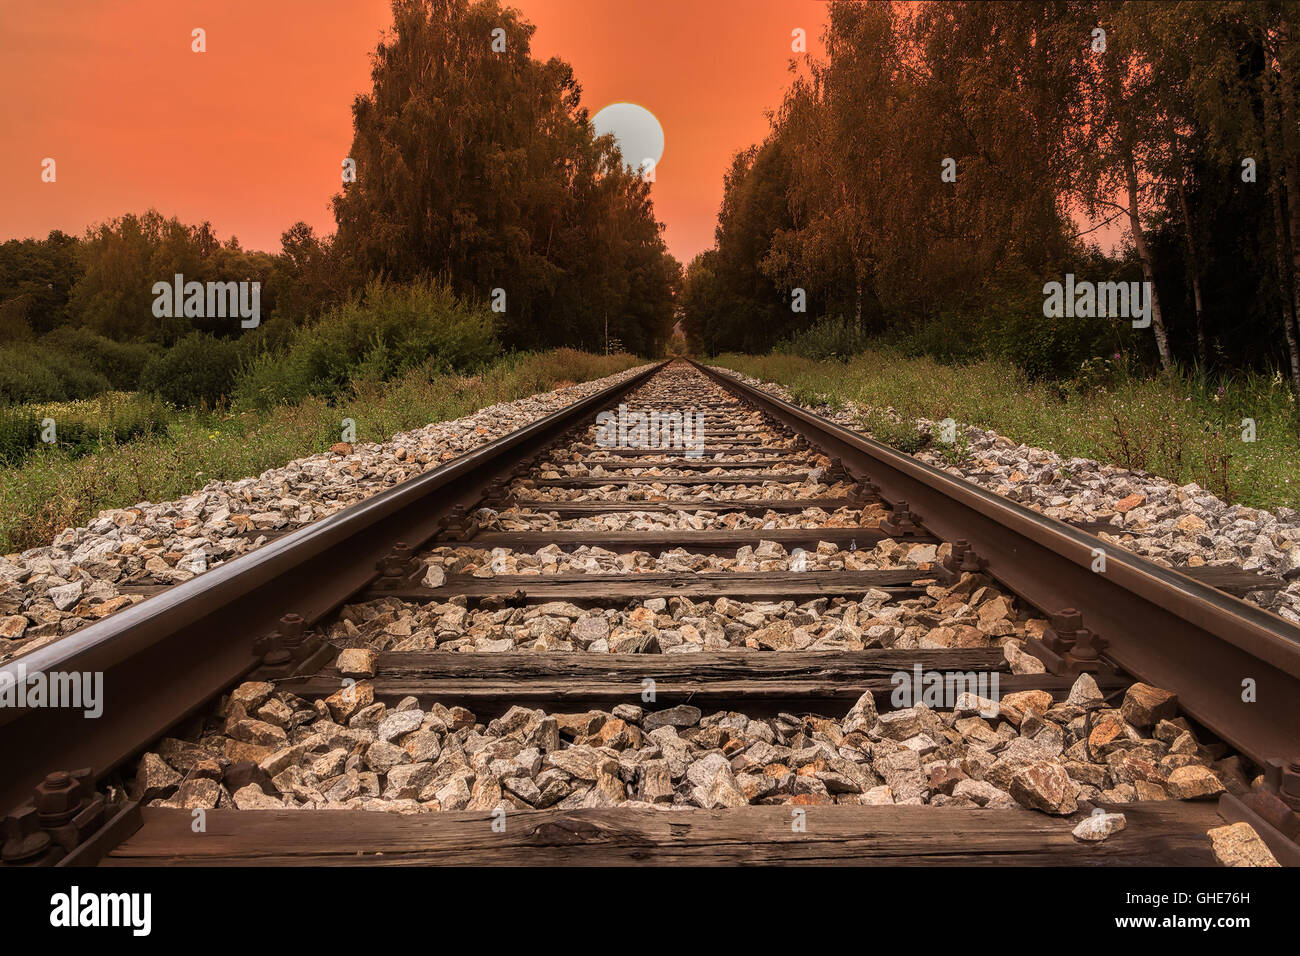 Railway line, trail or track  going through landscape at sunset or dawn. Red sky with big evening sun. Stock Photo